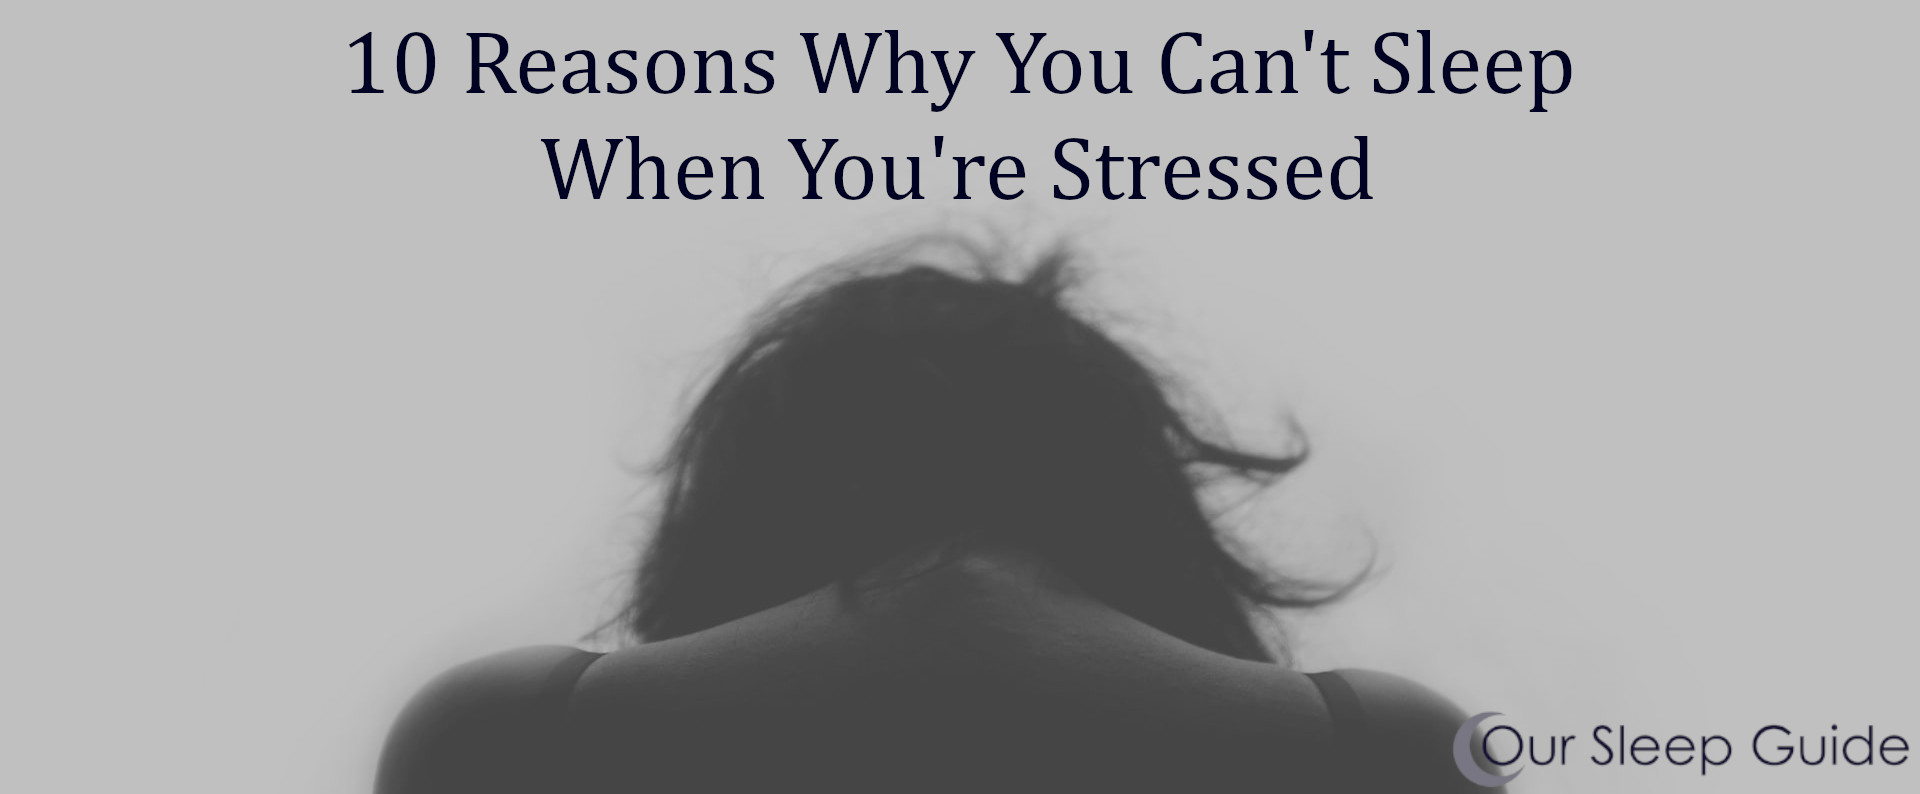 10 reasons why you can't sleep when you are stressed